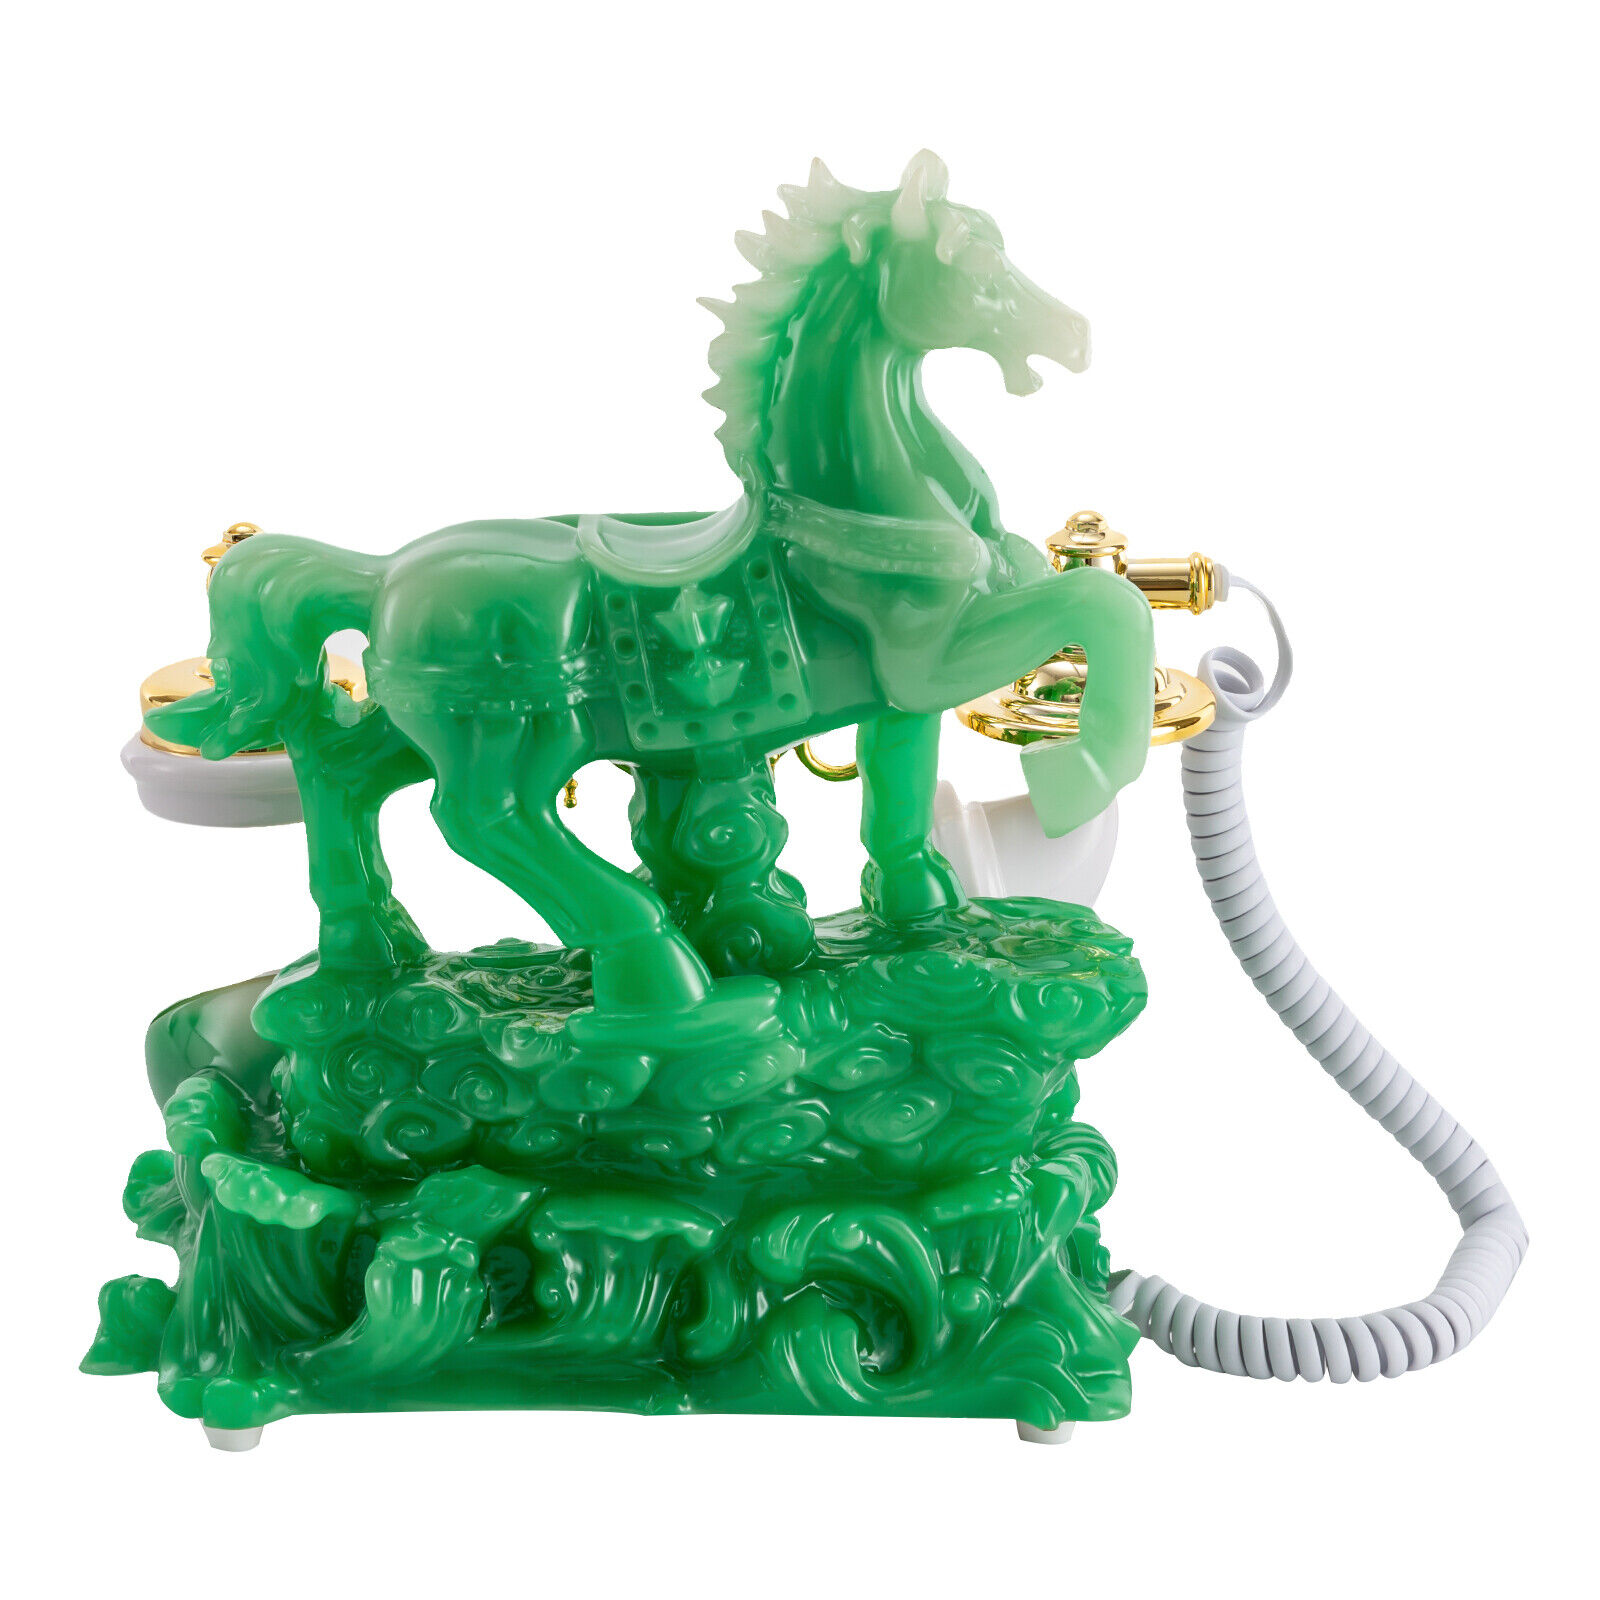 Retro Horse Design Telephone Dial Corded Phone Exquisite Workmanship Green Unbranded Does not apply - фотография #12